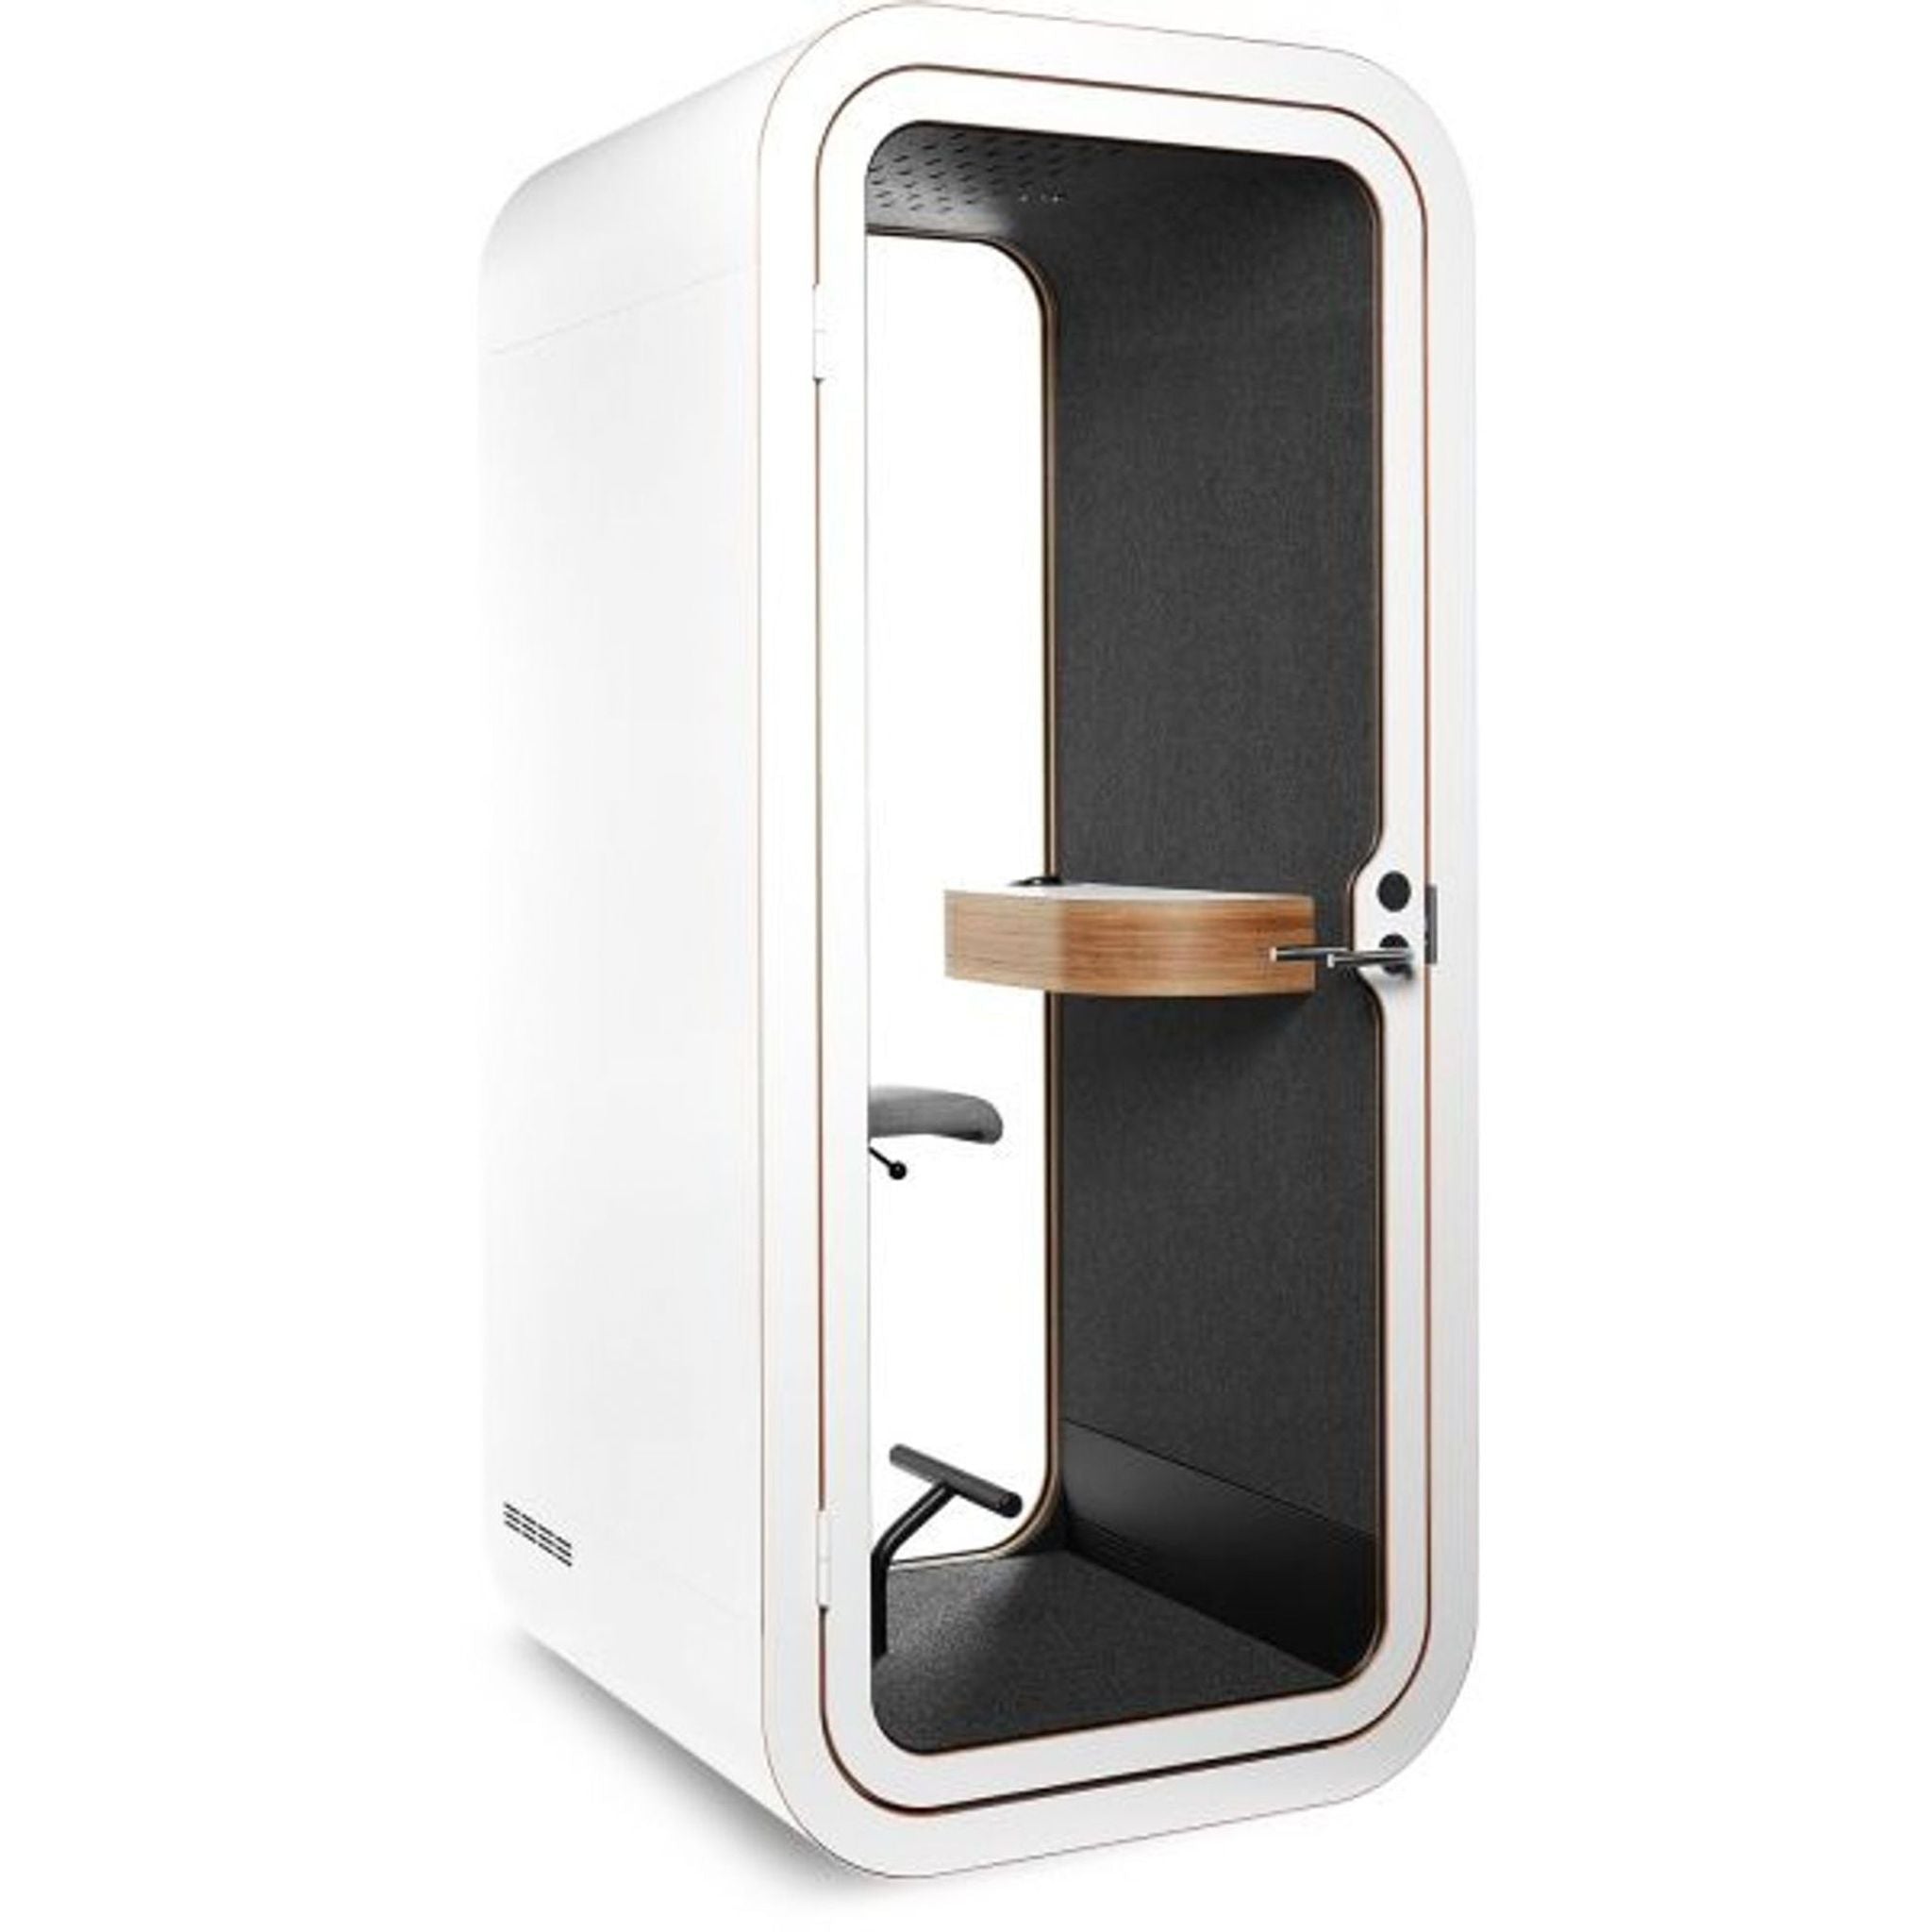 Soundproof privacy pod by Framery with closed door, showcasing a comfortable chair and built-in table, suitable for quiet work.